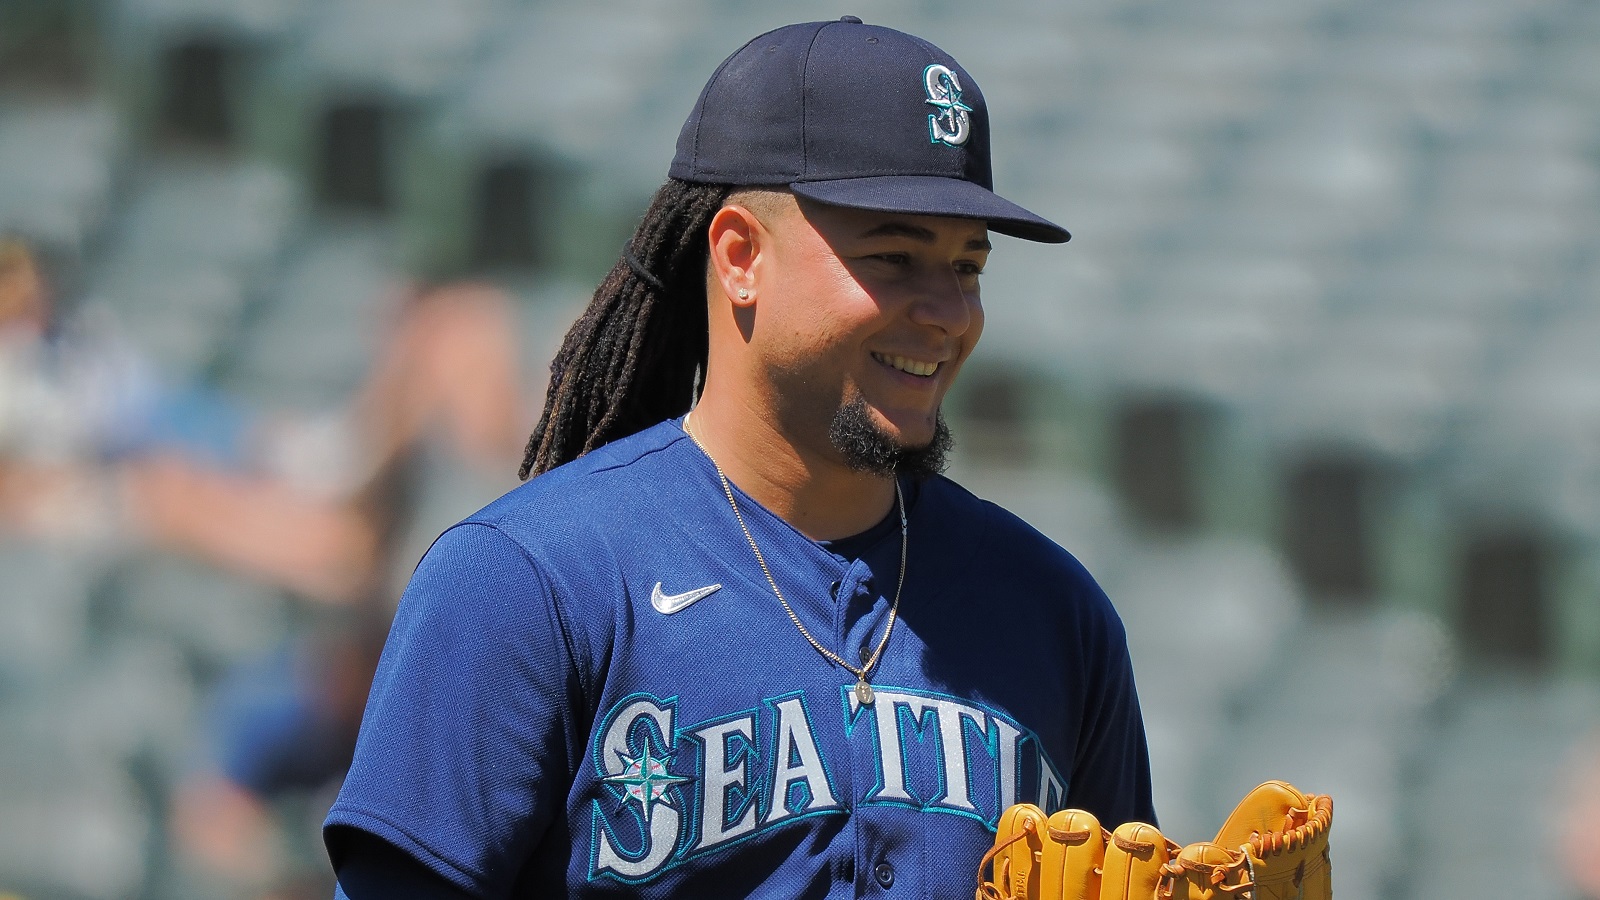 What makes Mariners pitcher Luis Castillo so rock solid on the mound